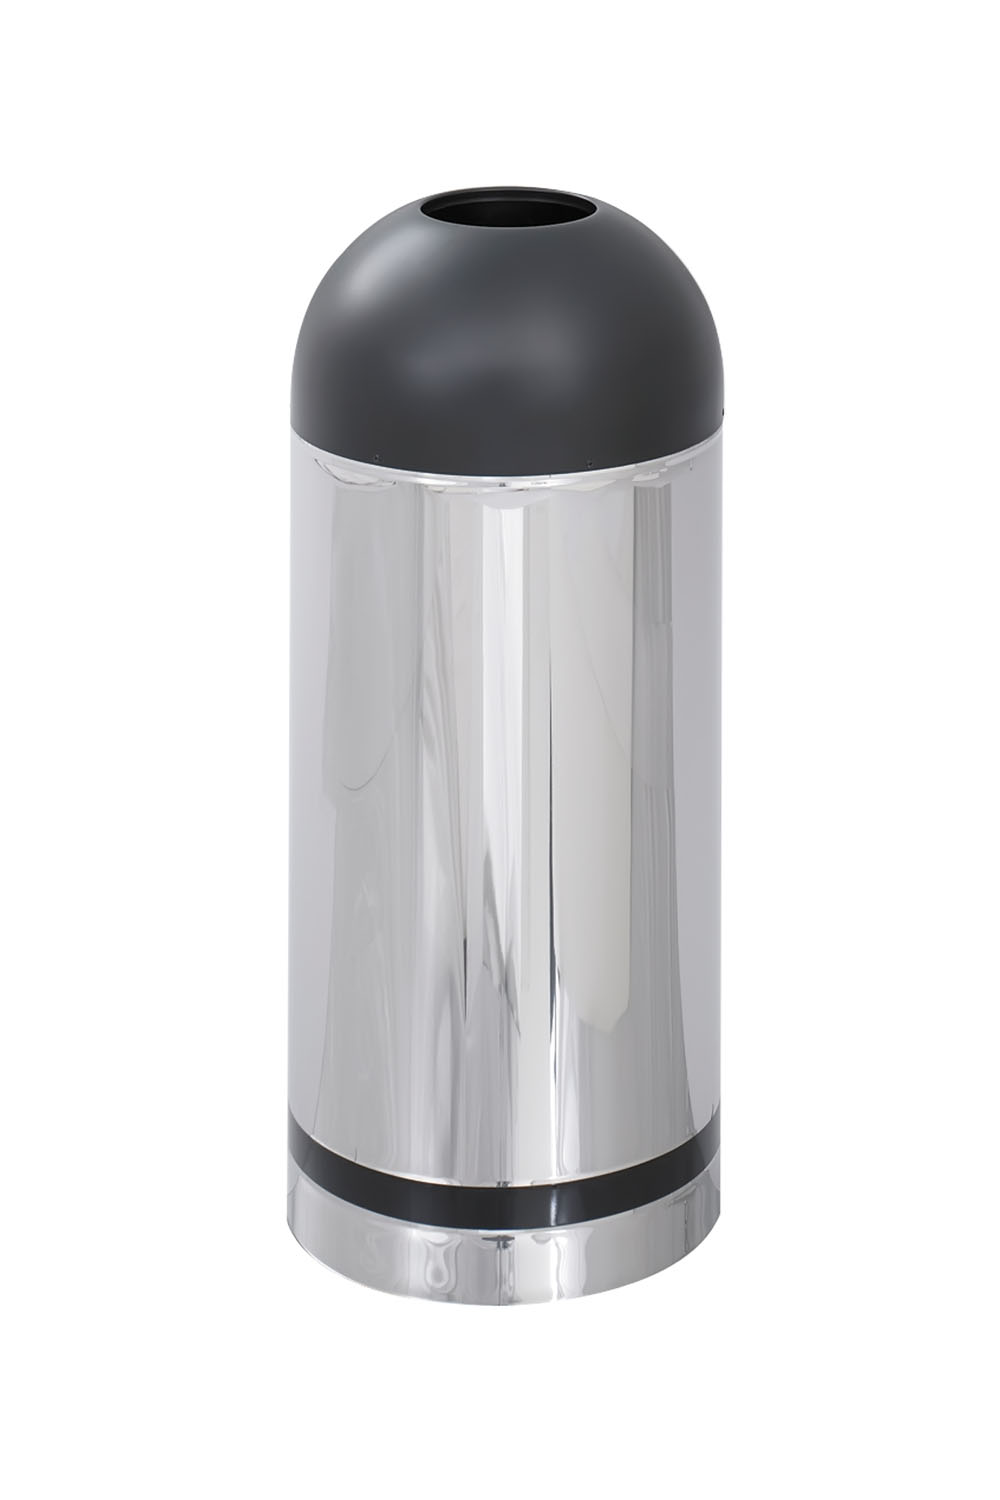 SAFCO PRODUCTS Reflections Open-Top Dome Receptacle, Round, Steel, 15 gal, Chrome/Black